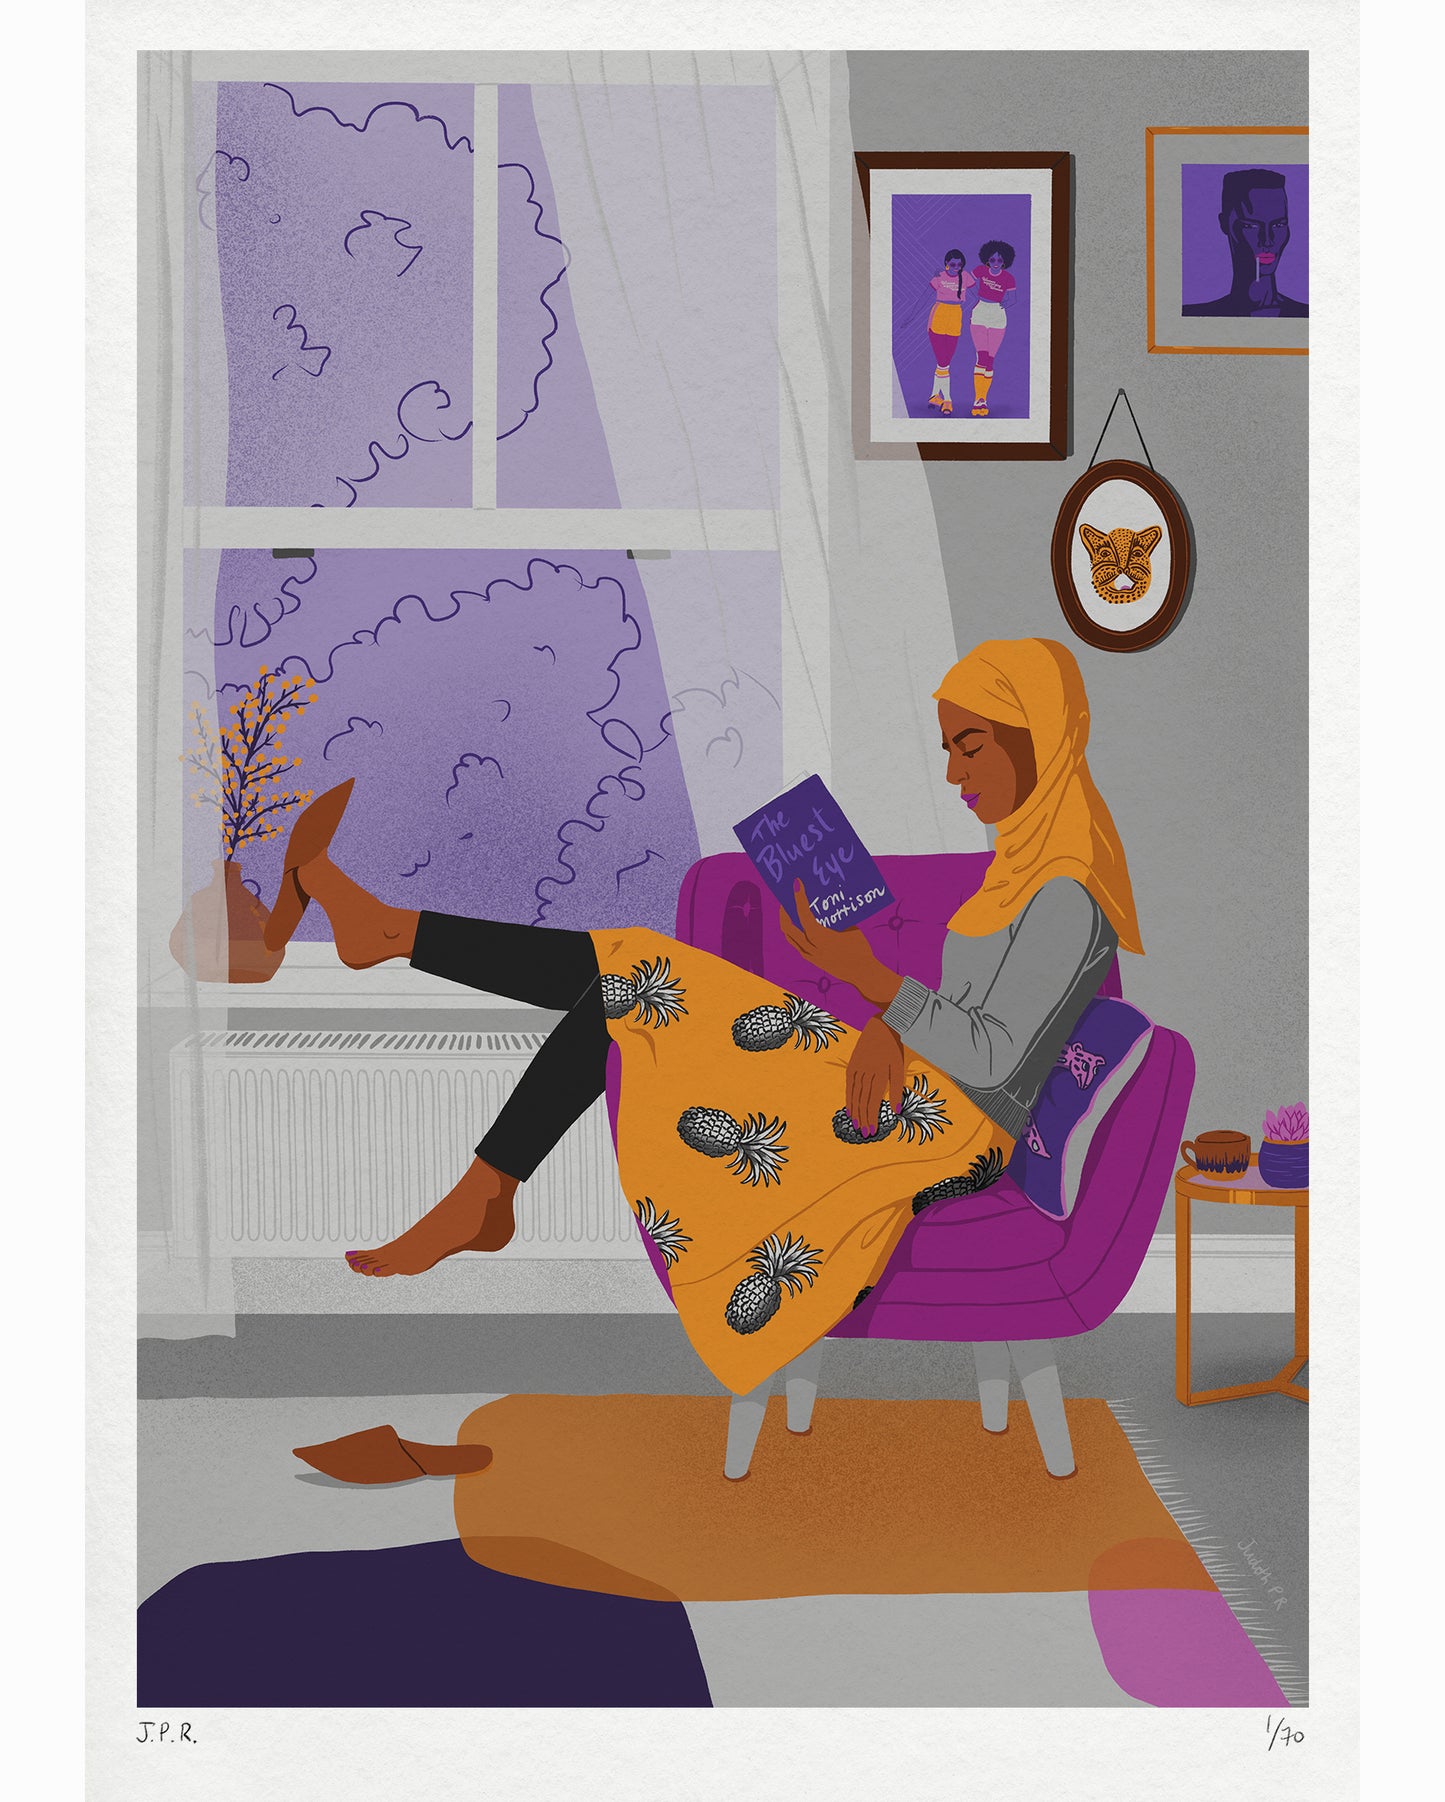 Illustration of a Muslim woman reading the book The Bluest Eye by Toni Morrison. She is sat by the window on an armchair and the light curtains are being moved by the breeze.